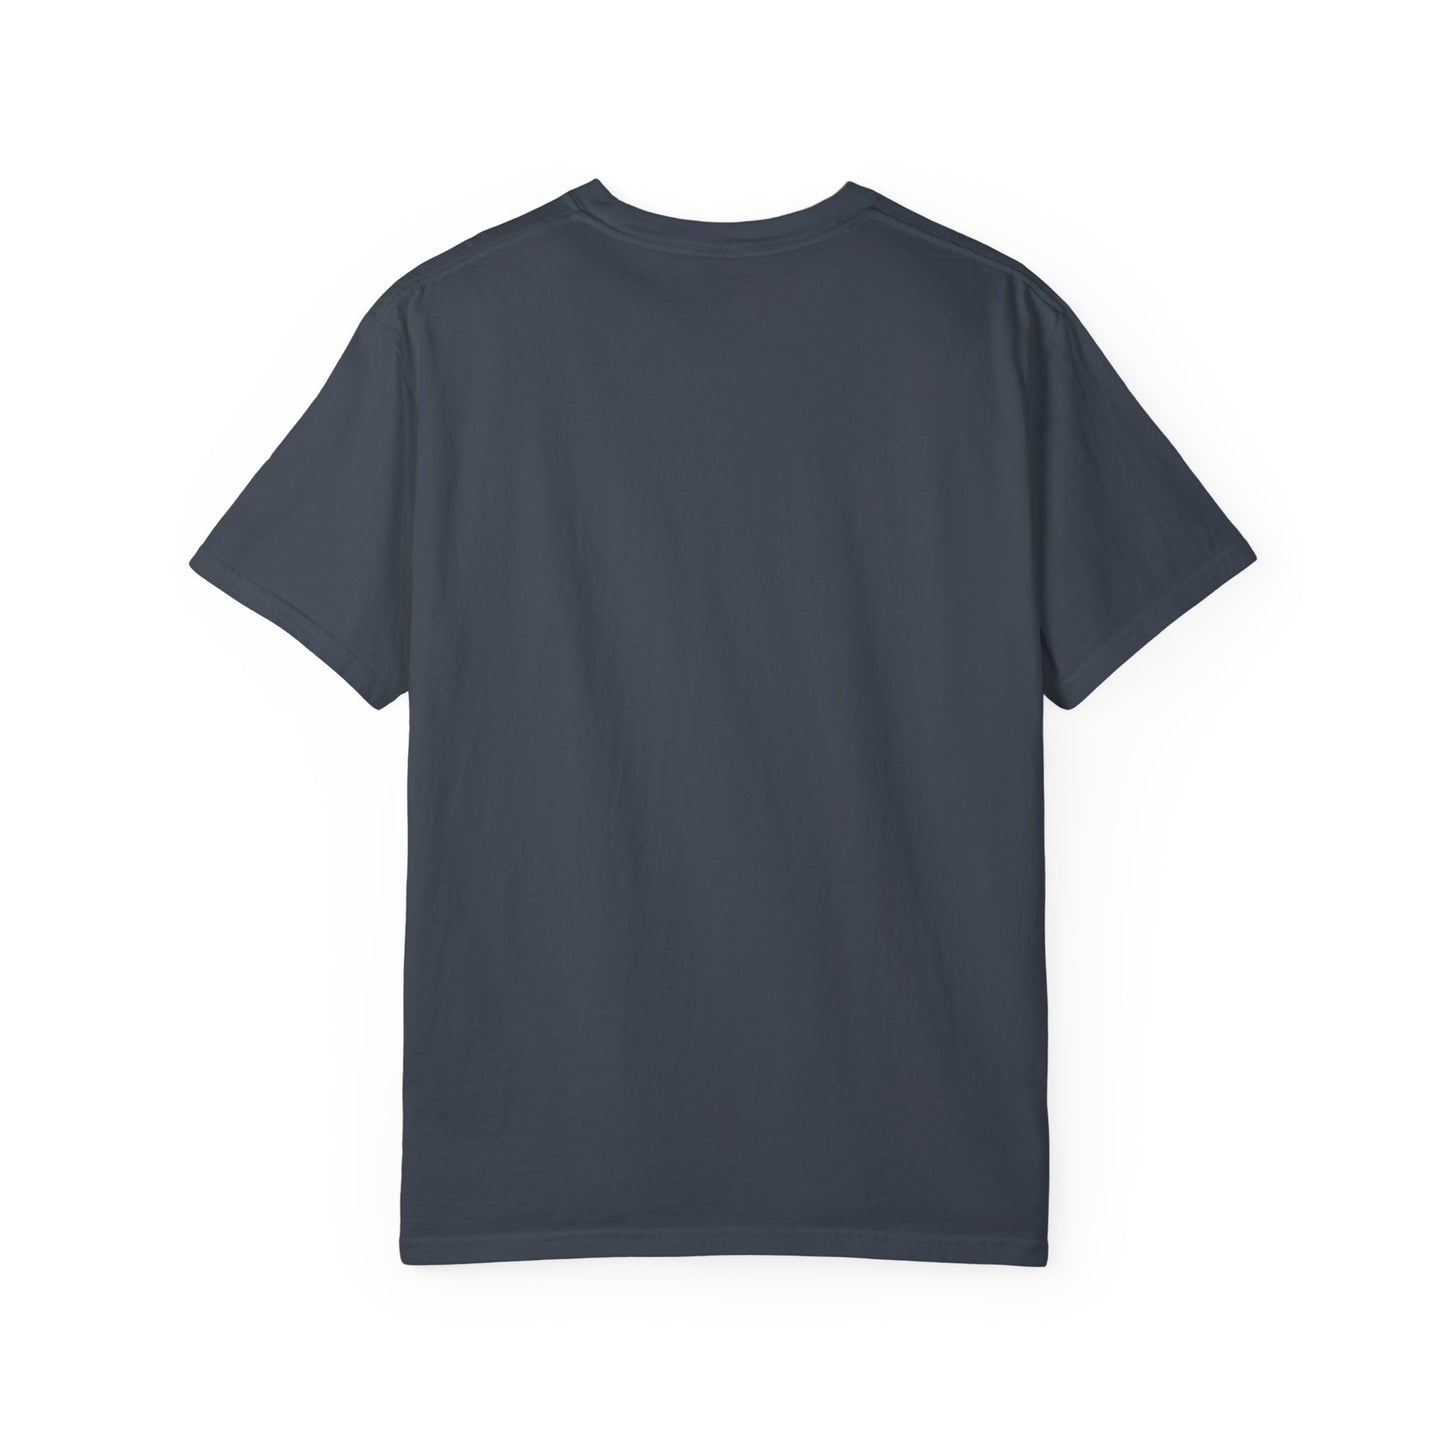 EASY COOK OVEN T-SHIRT